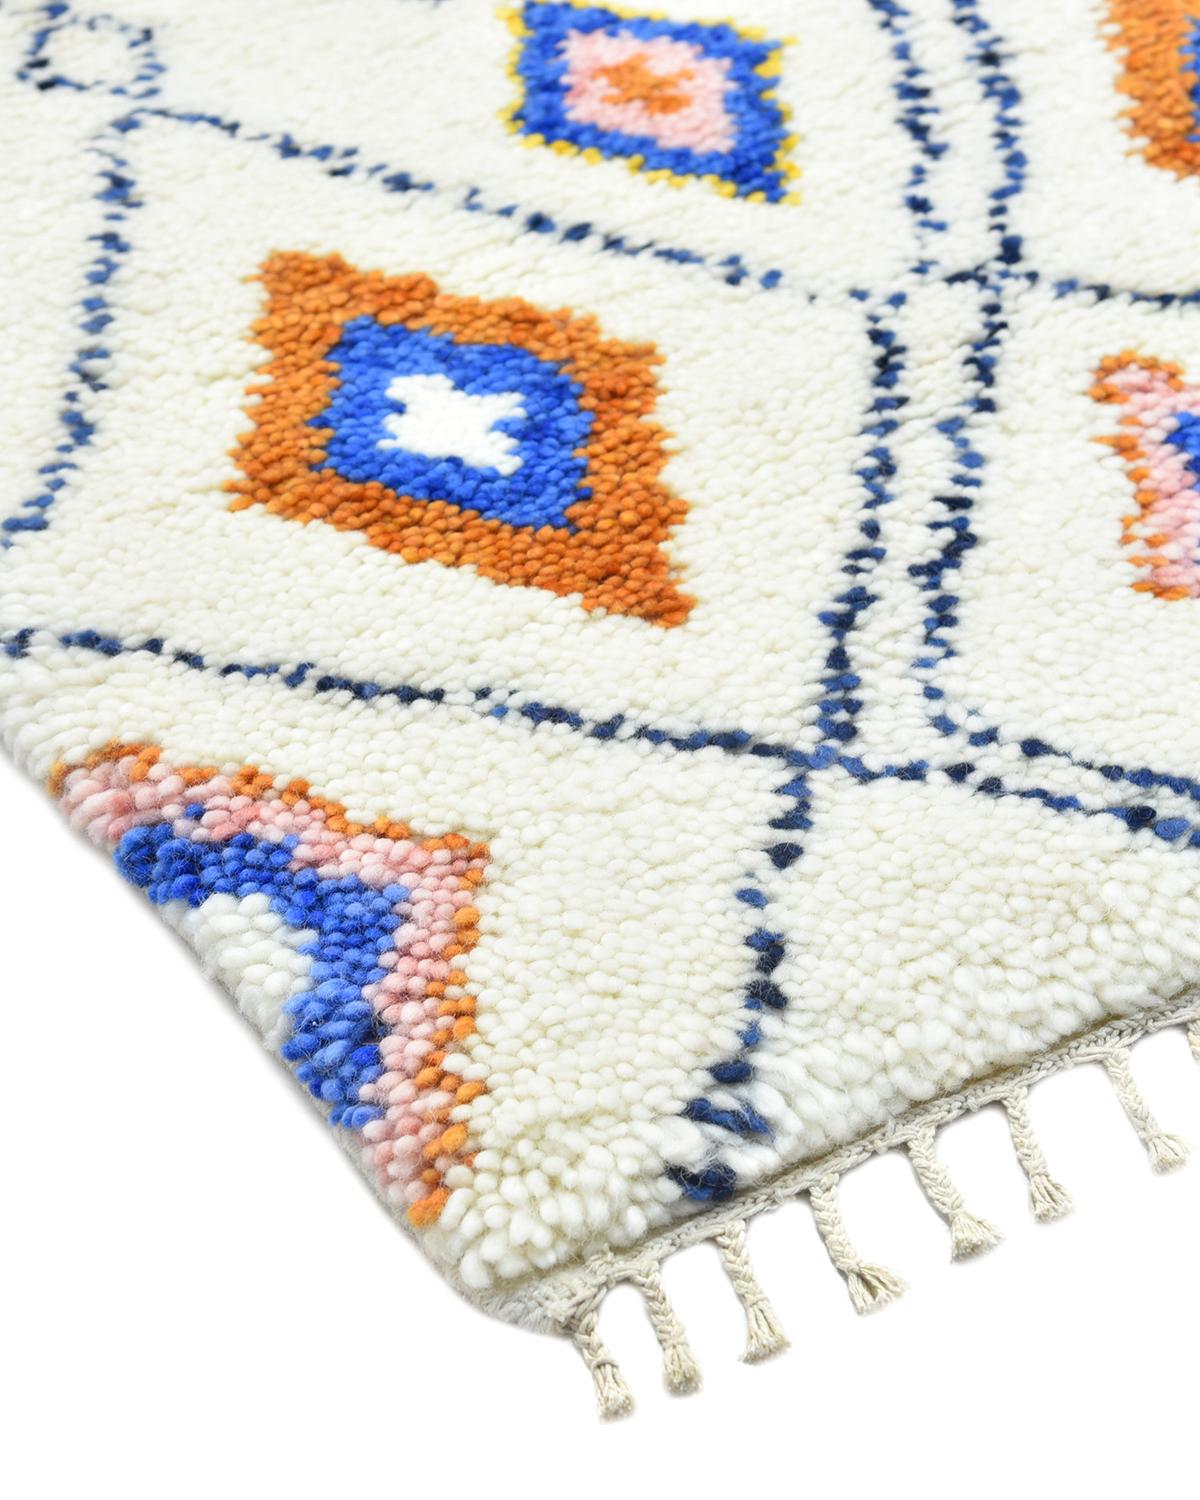 Morocco’s rug-making heritage encompasses everything from plush, neutral Beni Ourains to colorful, lightweight kilims. Paying homage to traditional craftsmanship and centuries-old motifs, these handmade rugs deliver a vibrant spirit to any space